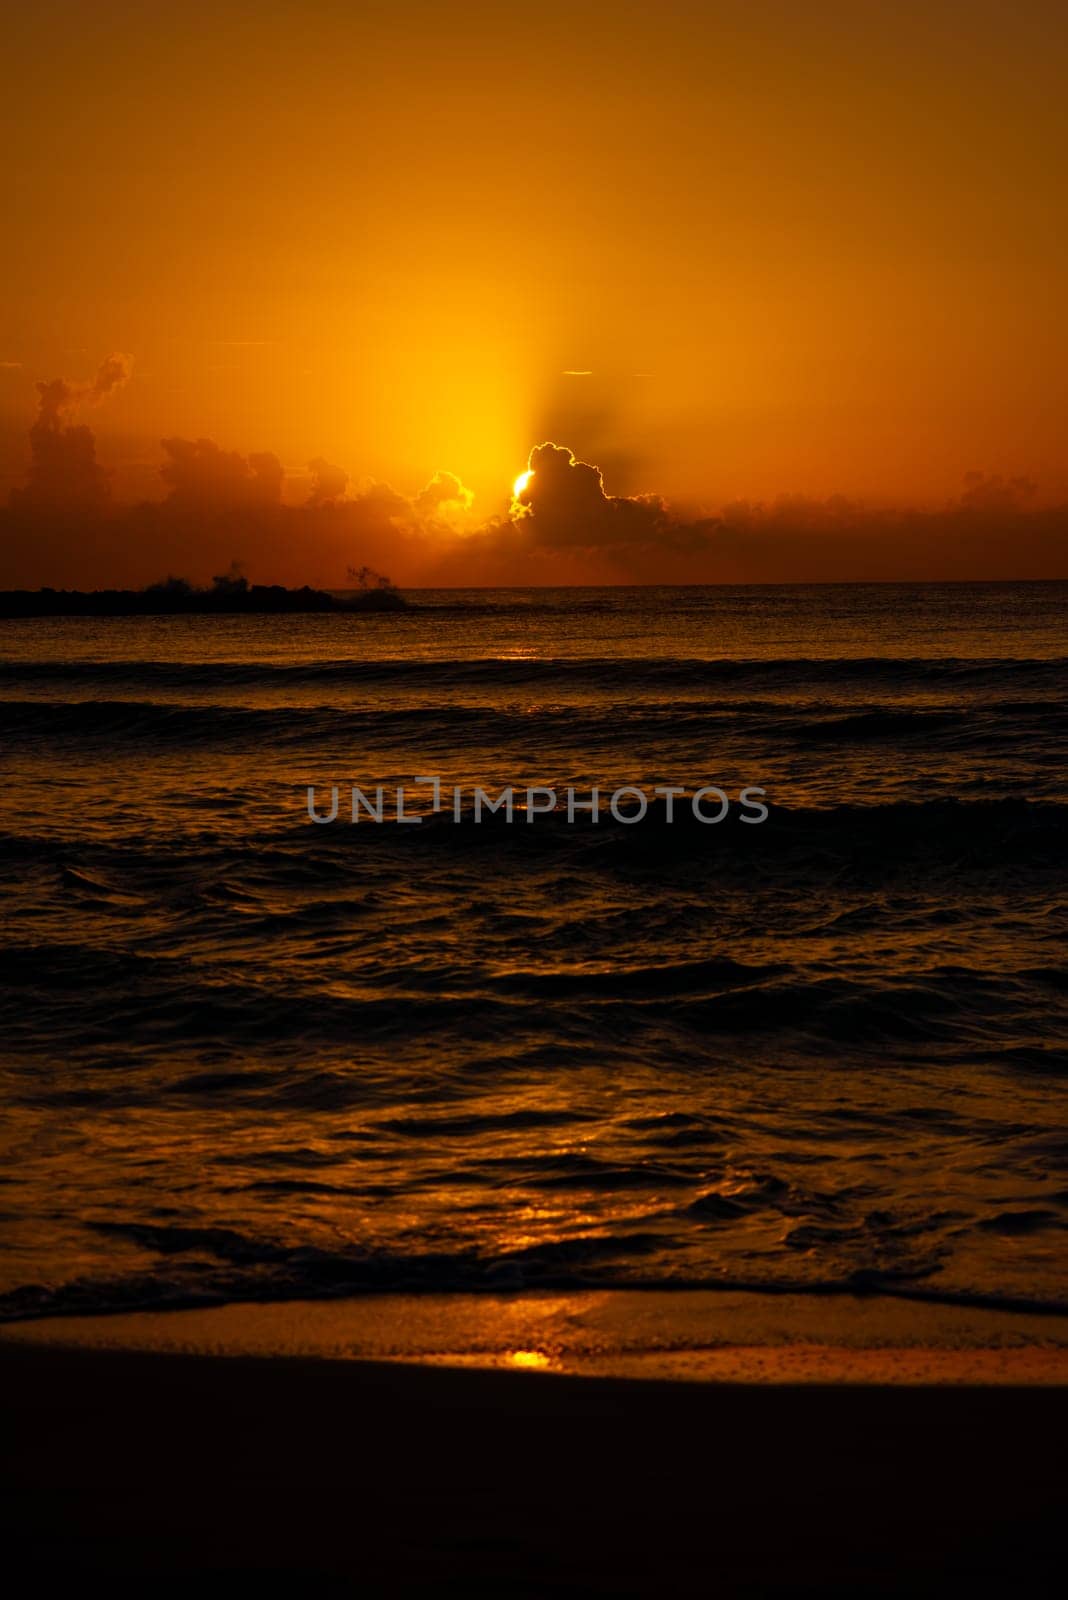 Sea beach with sky sunset or sunrise. Clouds over the sunset sea. Sunset at tropical beach. Nature sunset landscape of beautiful tropical sea.